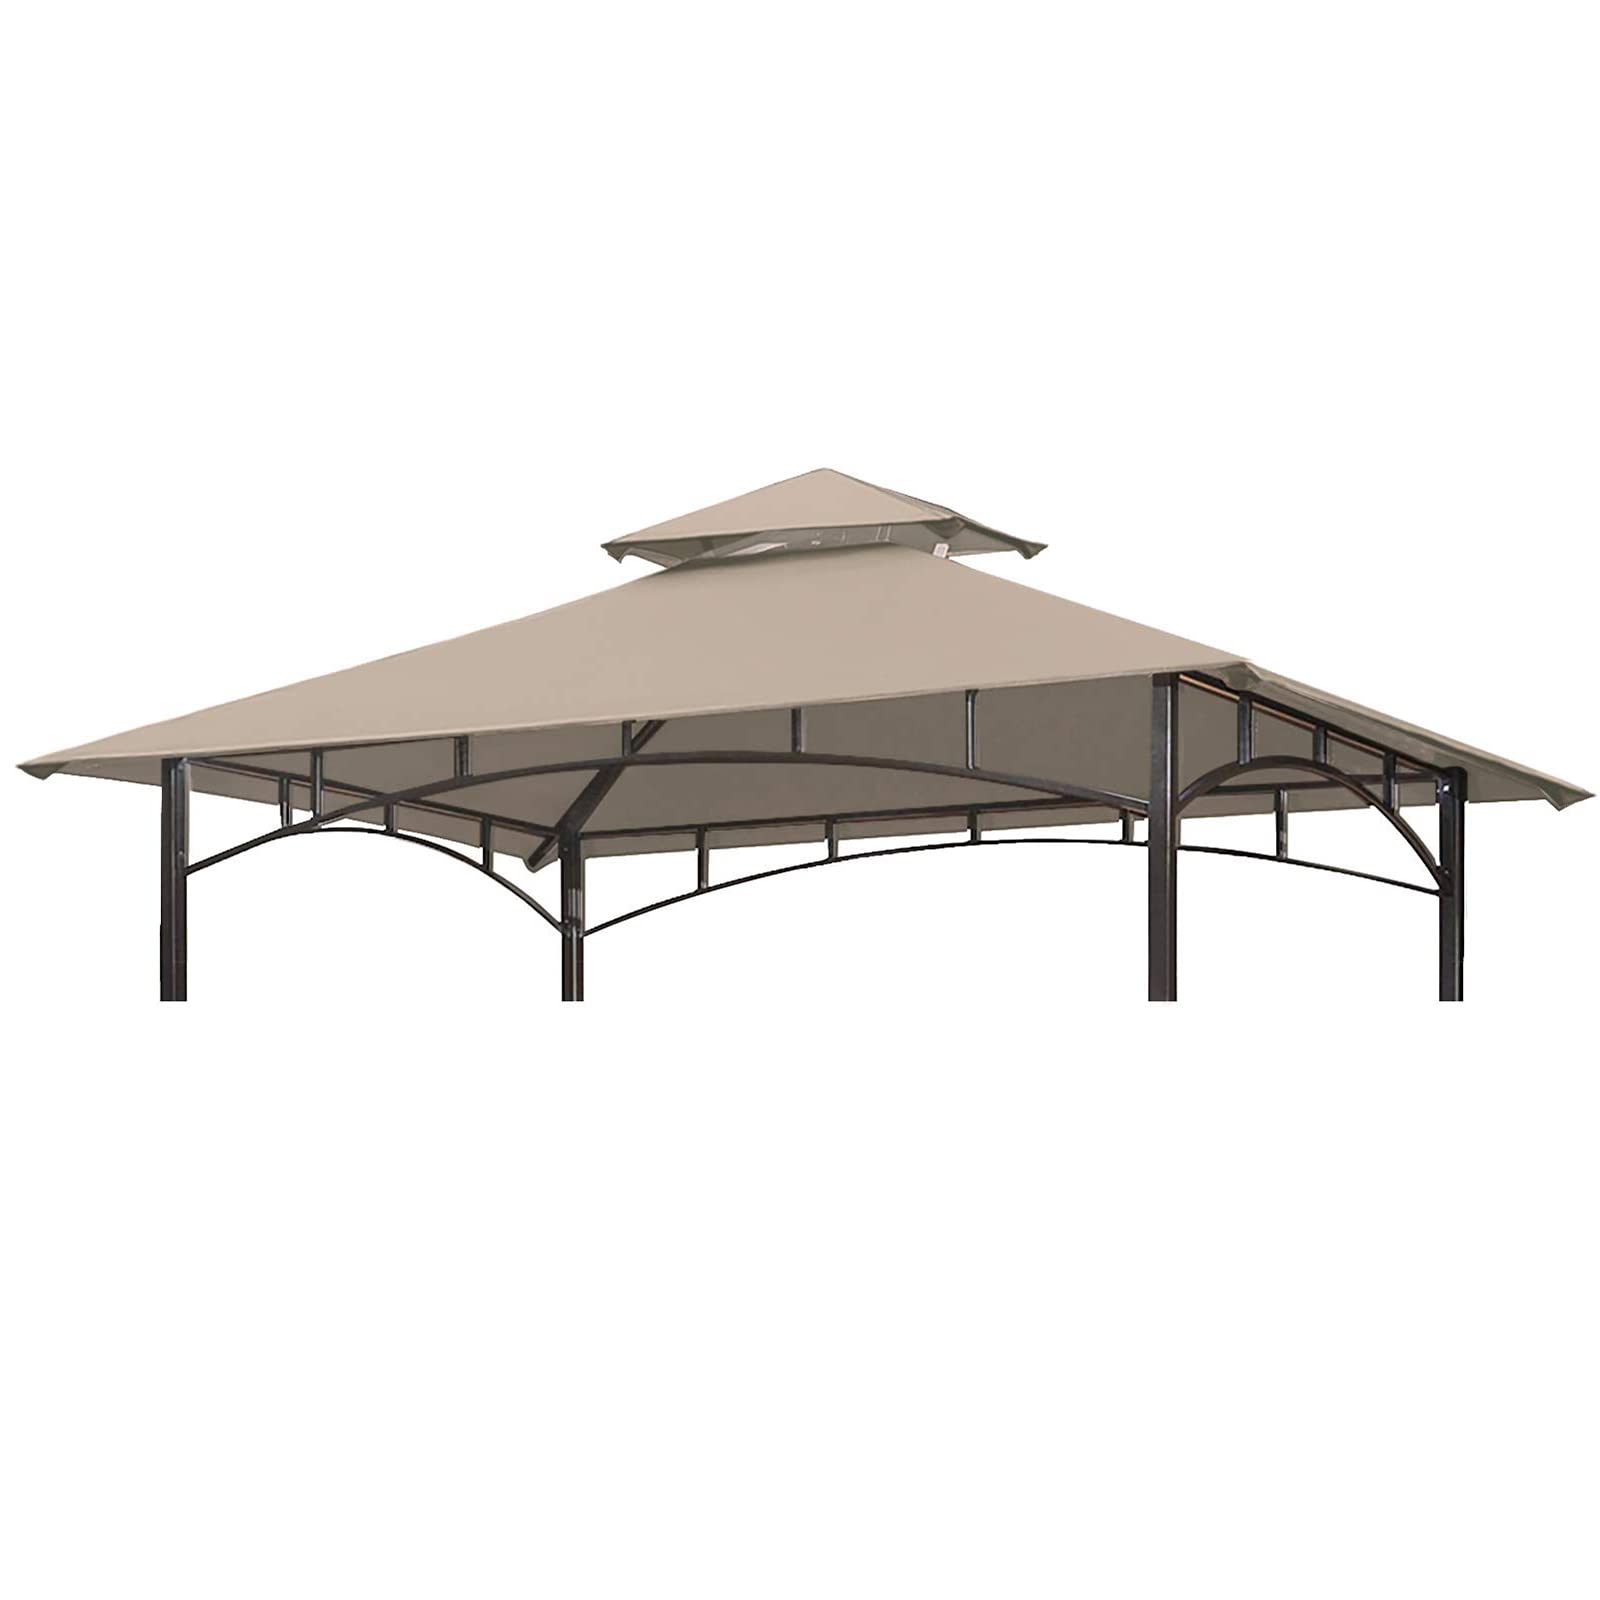 Warmally Grill Gazebo Replacement Canopy Roof, 5 X 8 Outdoor Bbq Gazebo Canopy Top Cover, Double Tired Grill Canopy Tent Cover W